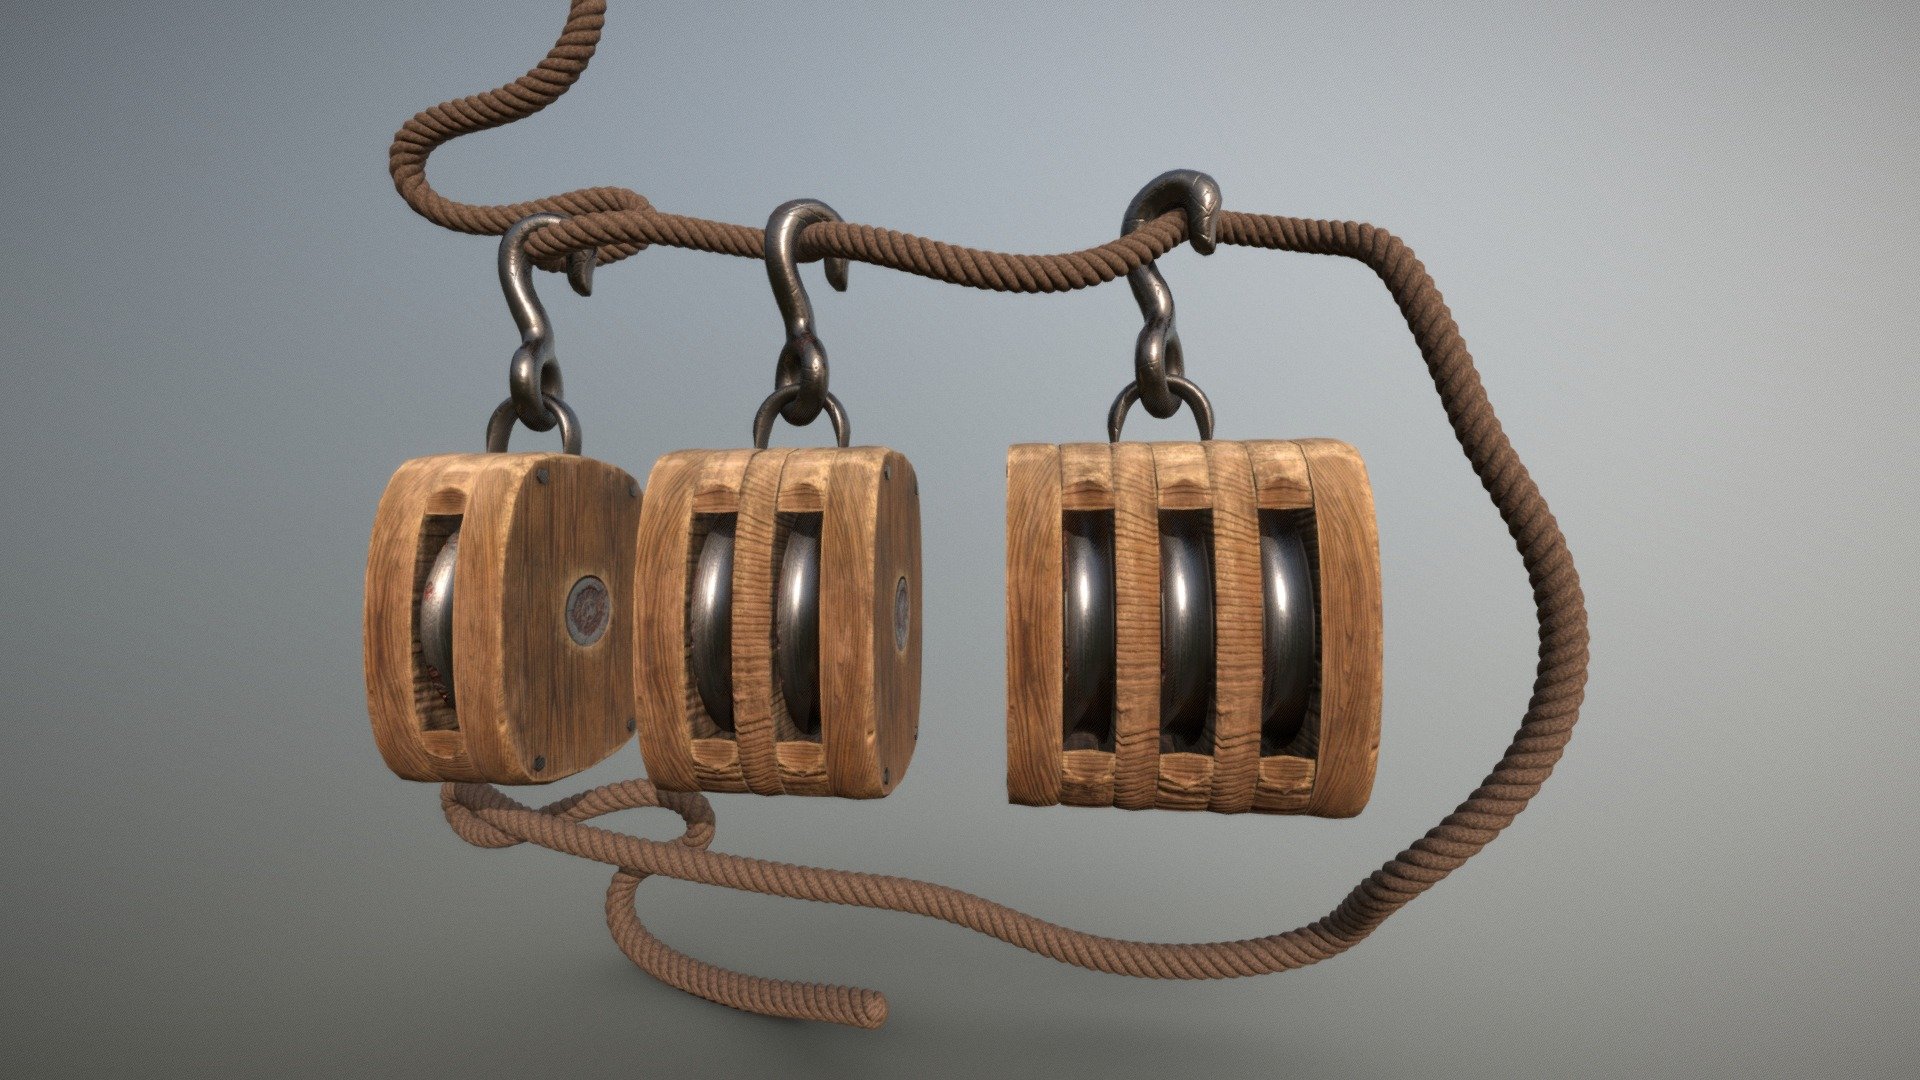 The beginnings of something new&hellip; a ship perhaps? - Block and Tackle - 3D model by Beau James (@BeauJames) 3d model